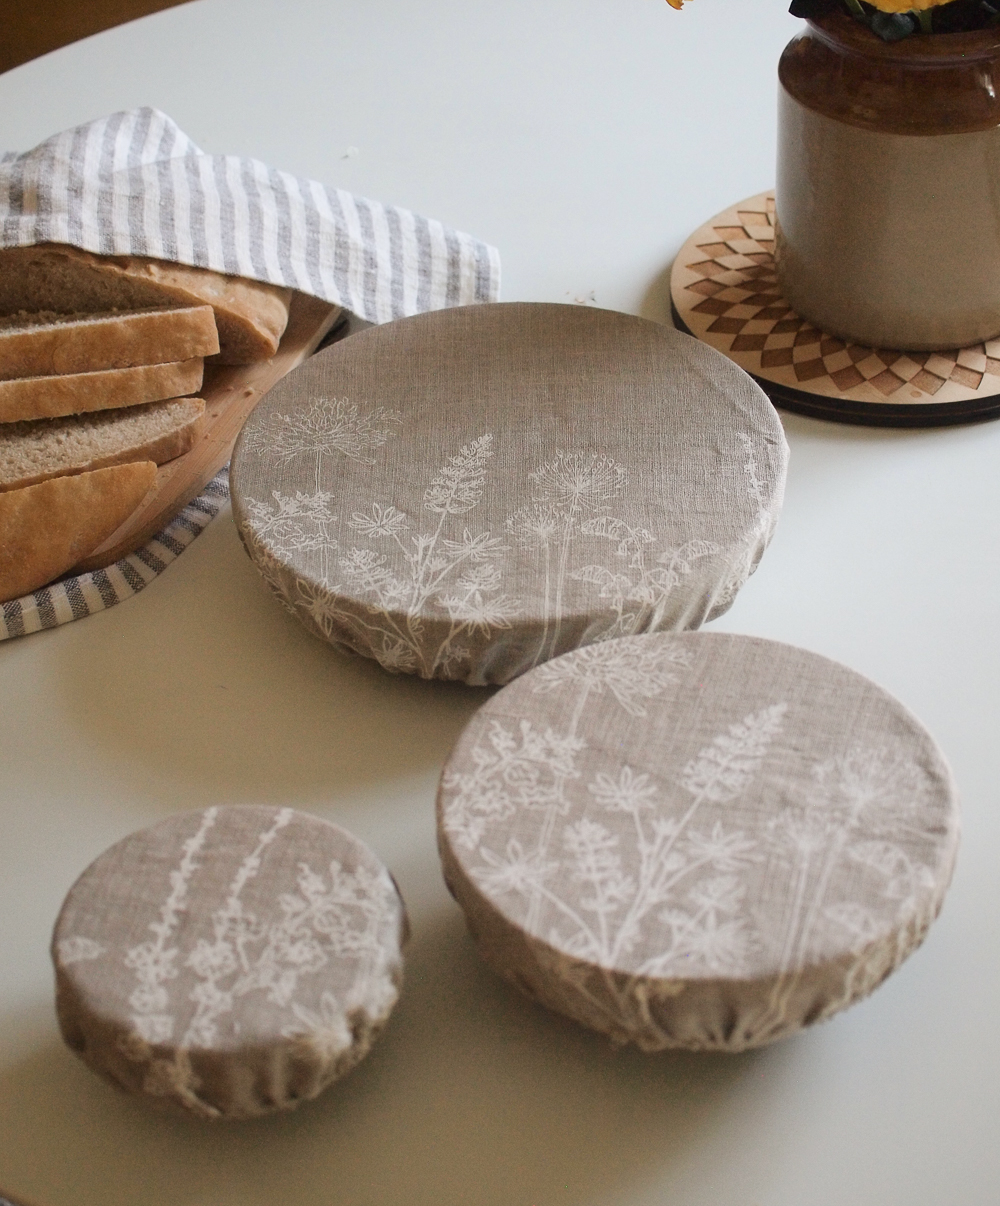 Set of three re-usable bowl covers on table